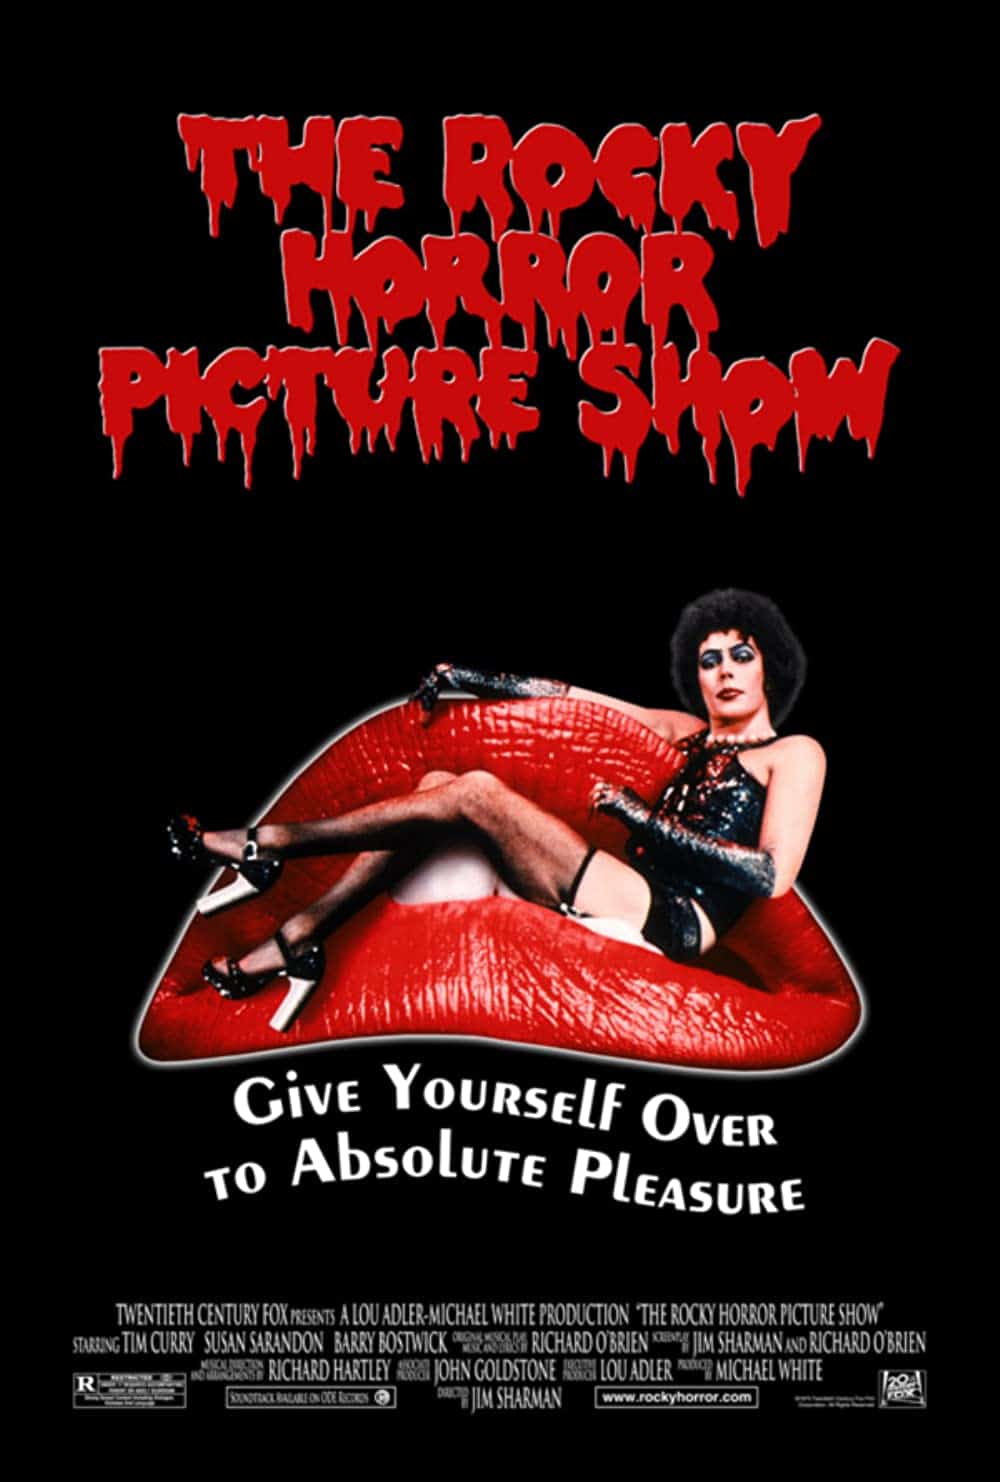 The Rocky Horror Picture Show (1975) Cult Movies You Should Binge-Watch this Holiday